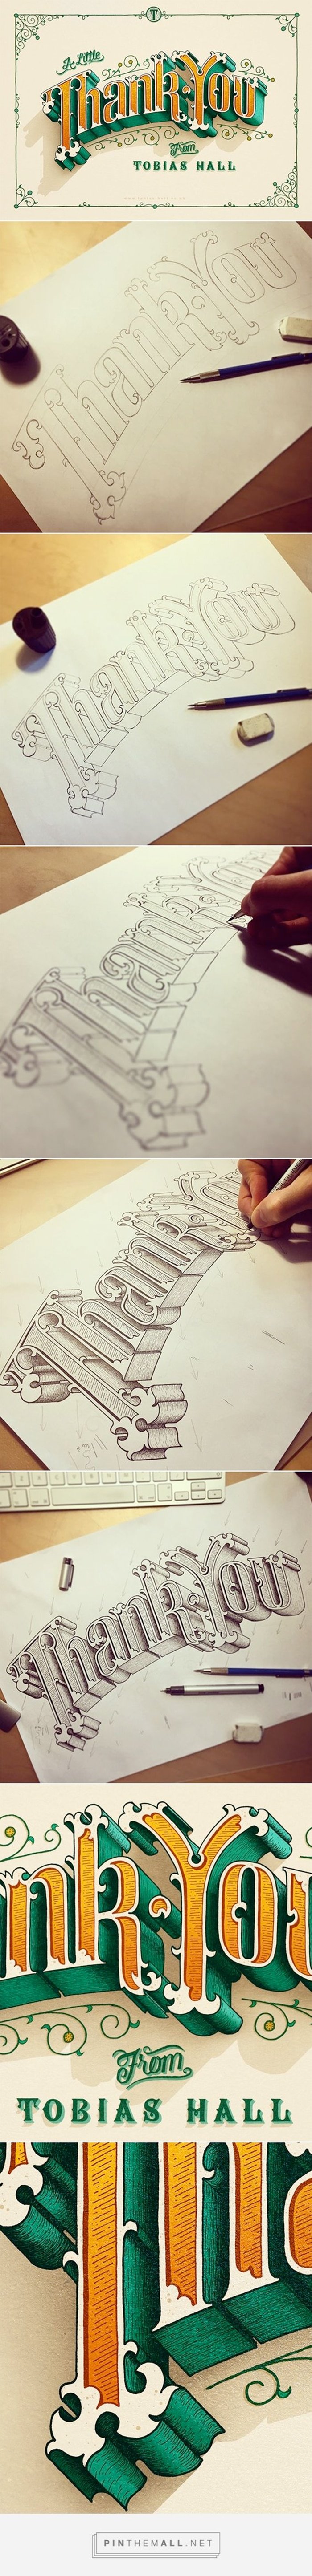 thank you - cool typography examples to inspire you